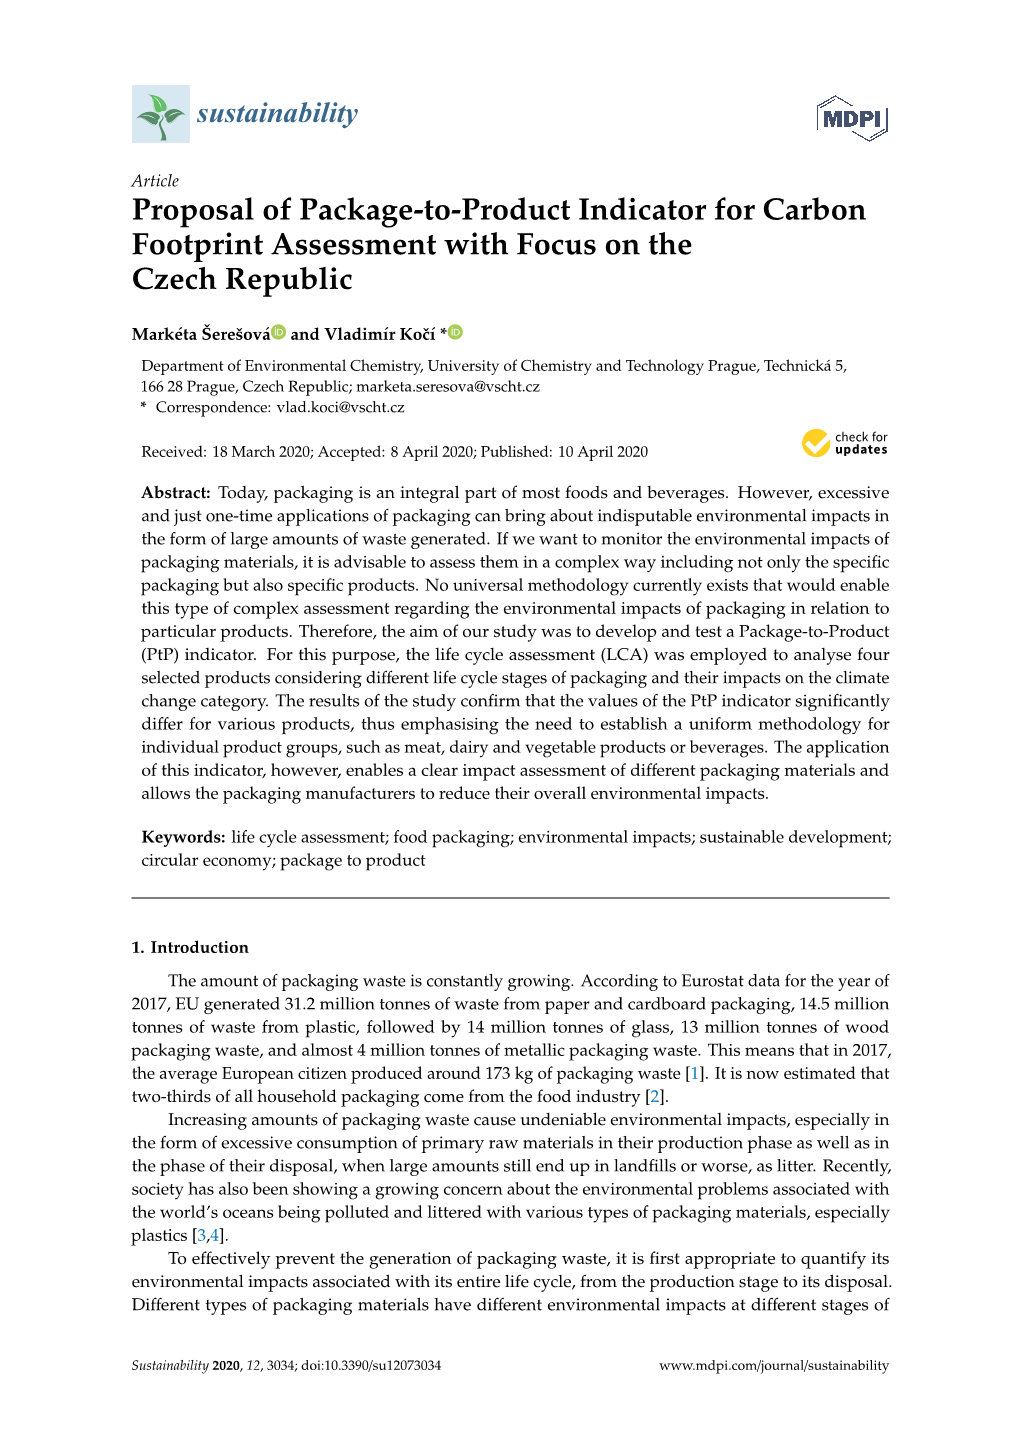 Proposal of Package-To-Product Indicator for Carbon Footprint Assessment with Focus on the Czech Republic